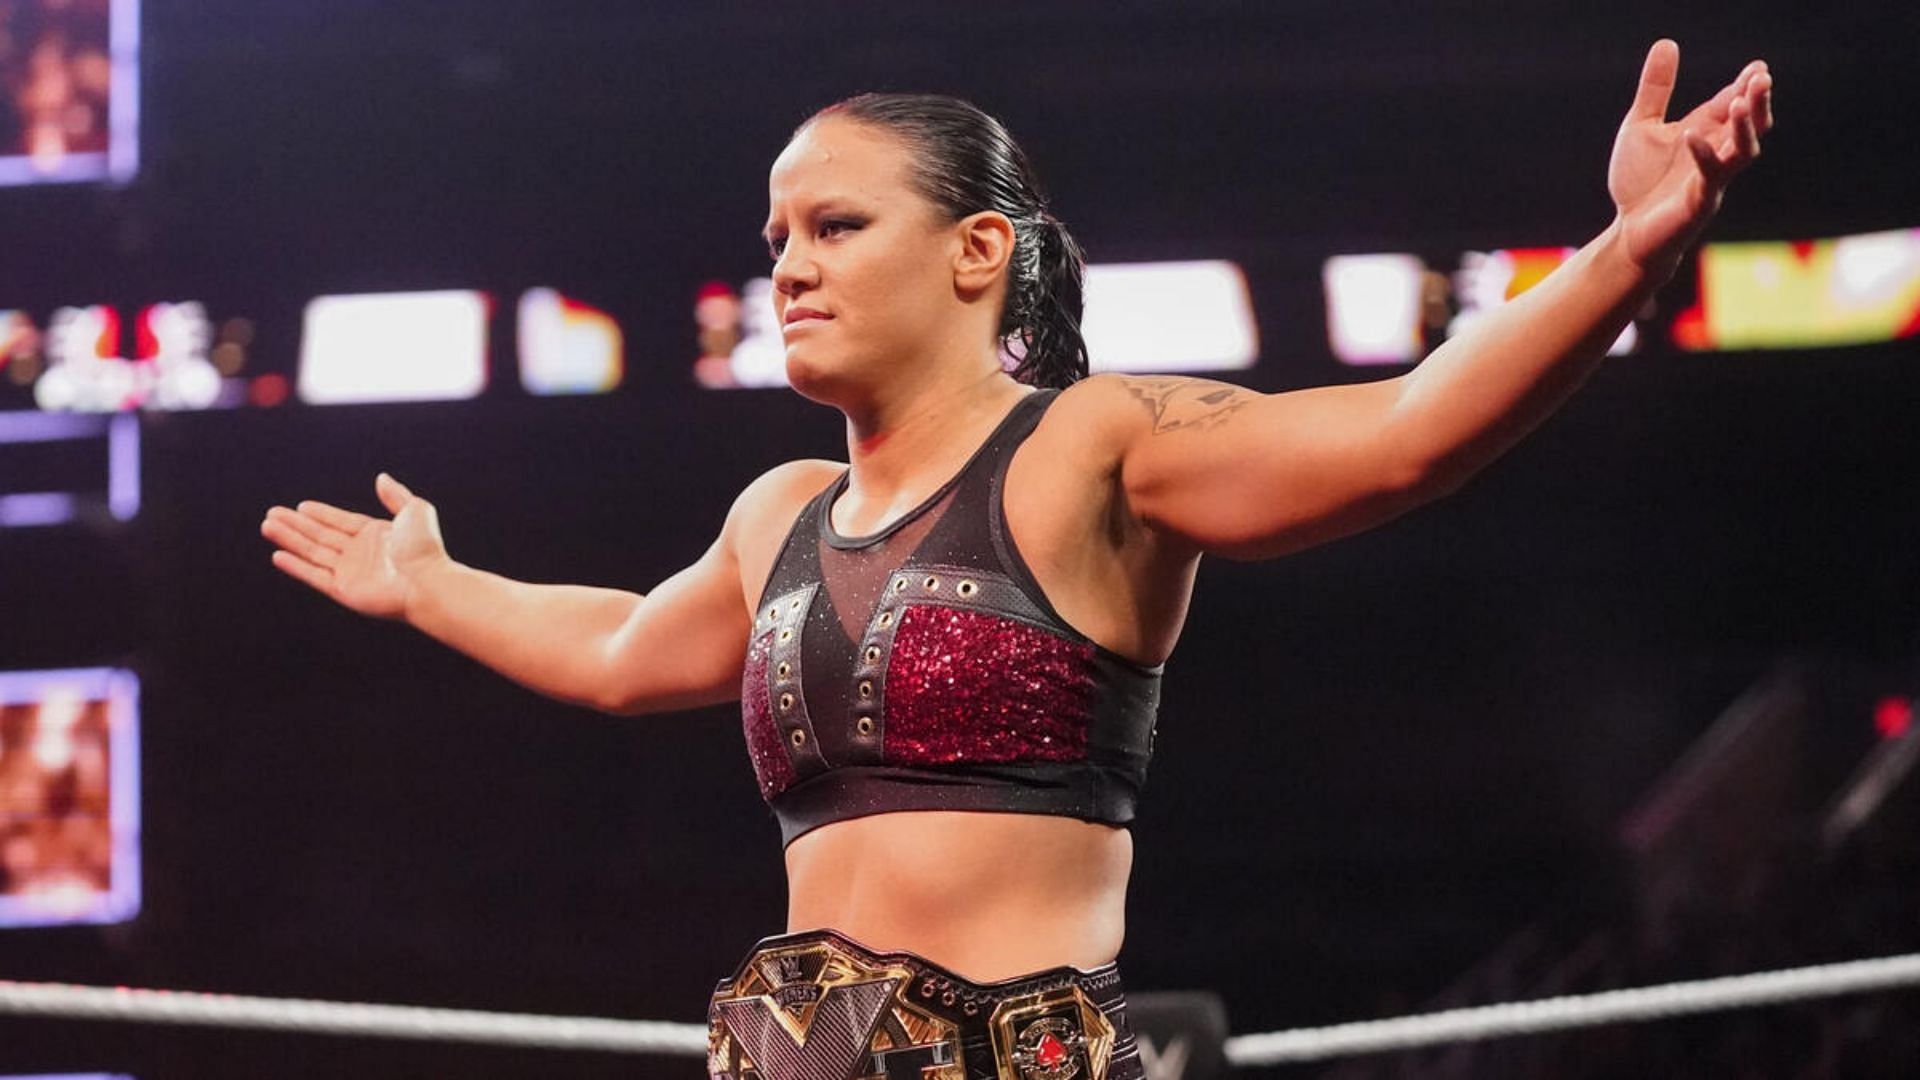 Shayna Baszler is one of the toughest names in WWE Women